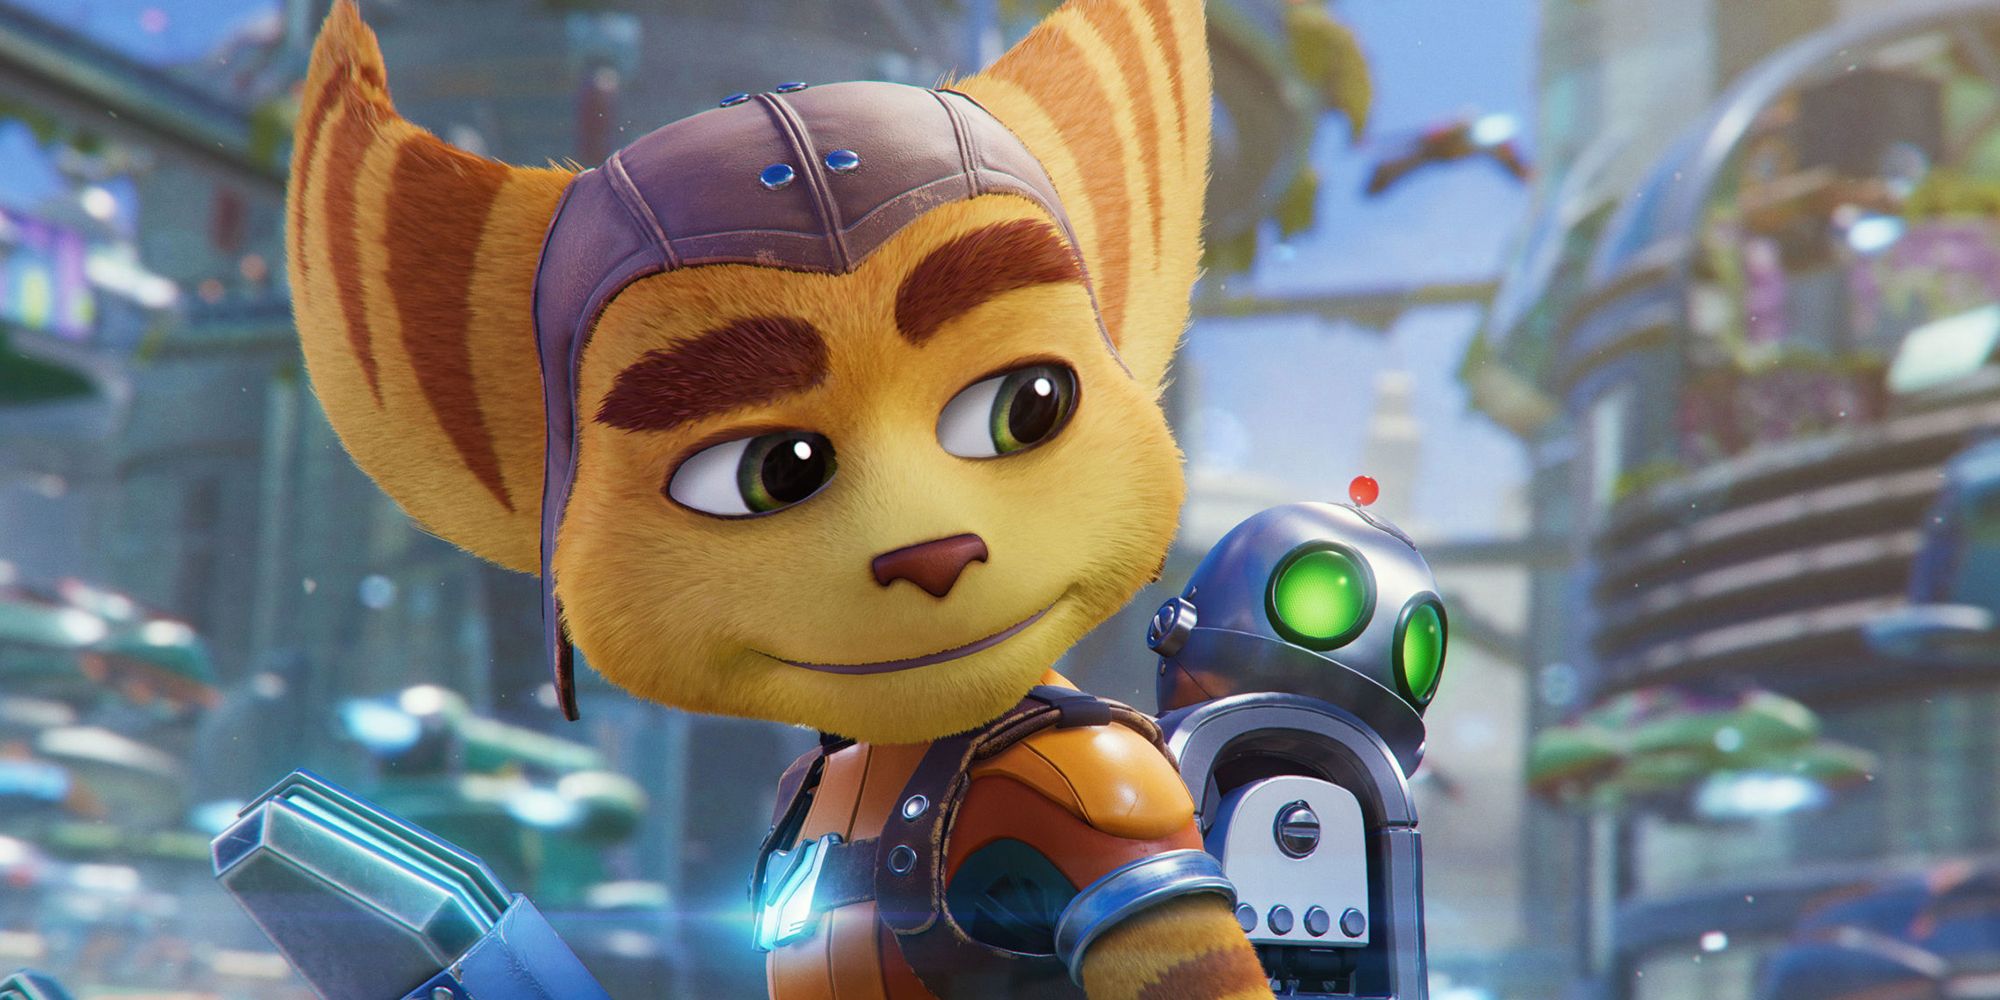 Kratos To Ratchet & Clank: Who PlayStation’s Coolest Mascot Really Is